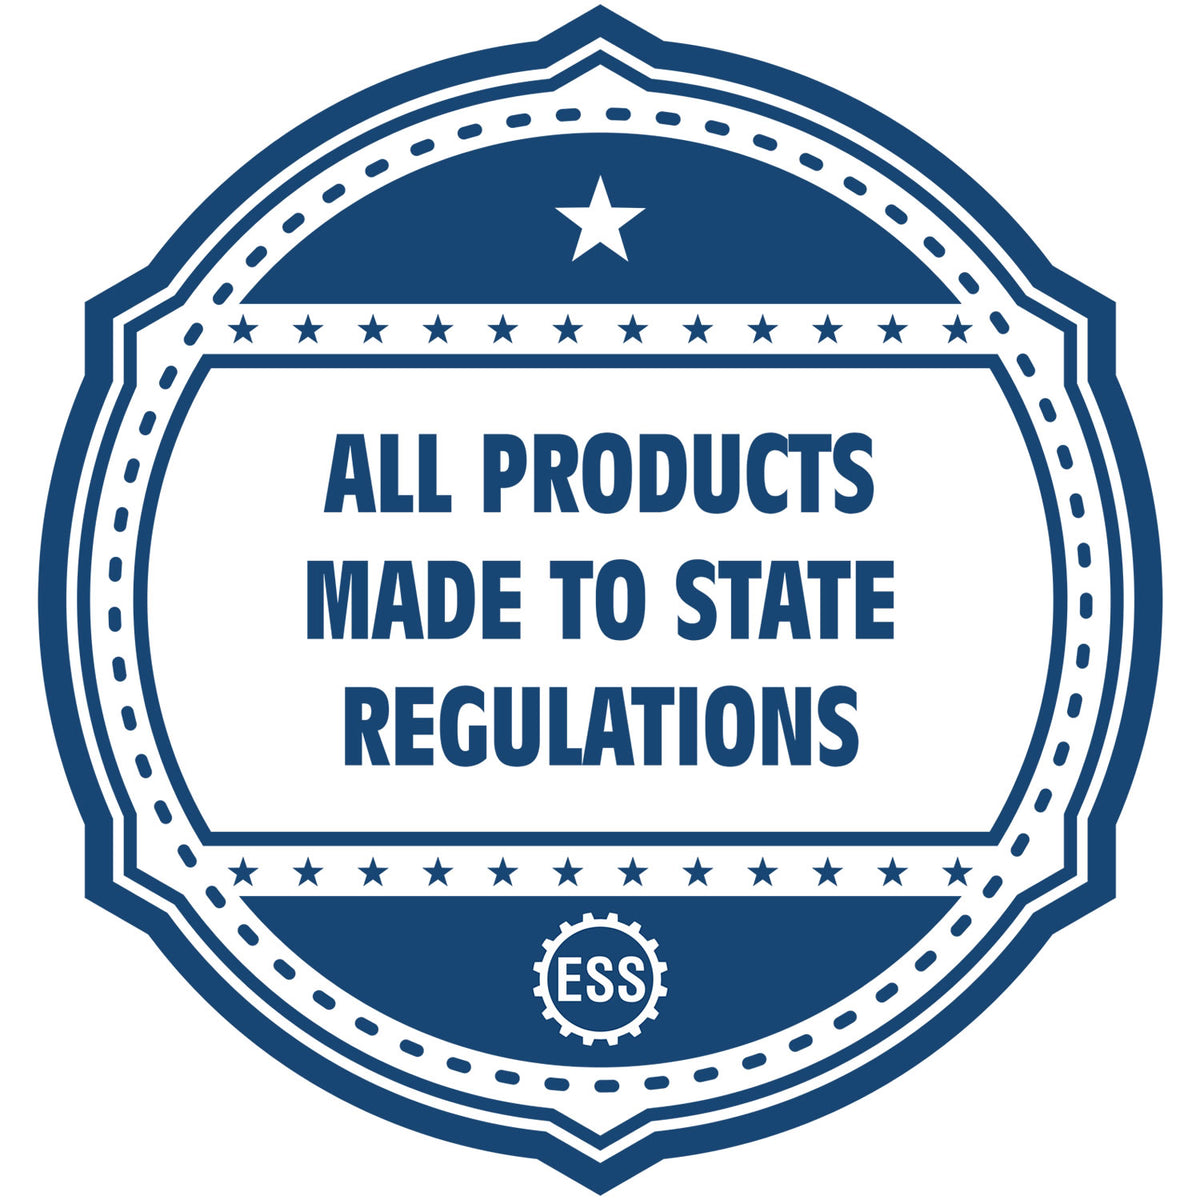 An icon or badge element for the Slim Pre-Inked State Seal Notary Stamp for New Jersey showing that this product is made in compliance with state regulations.